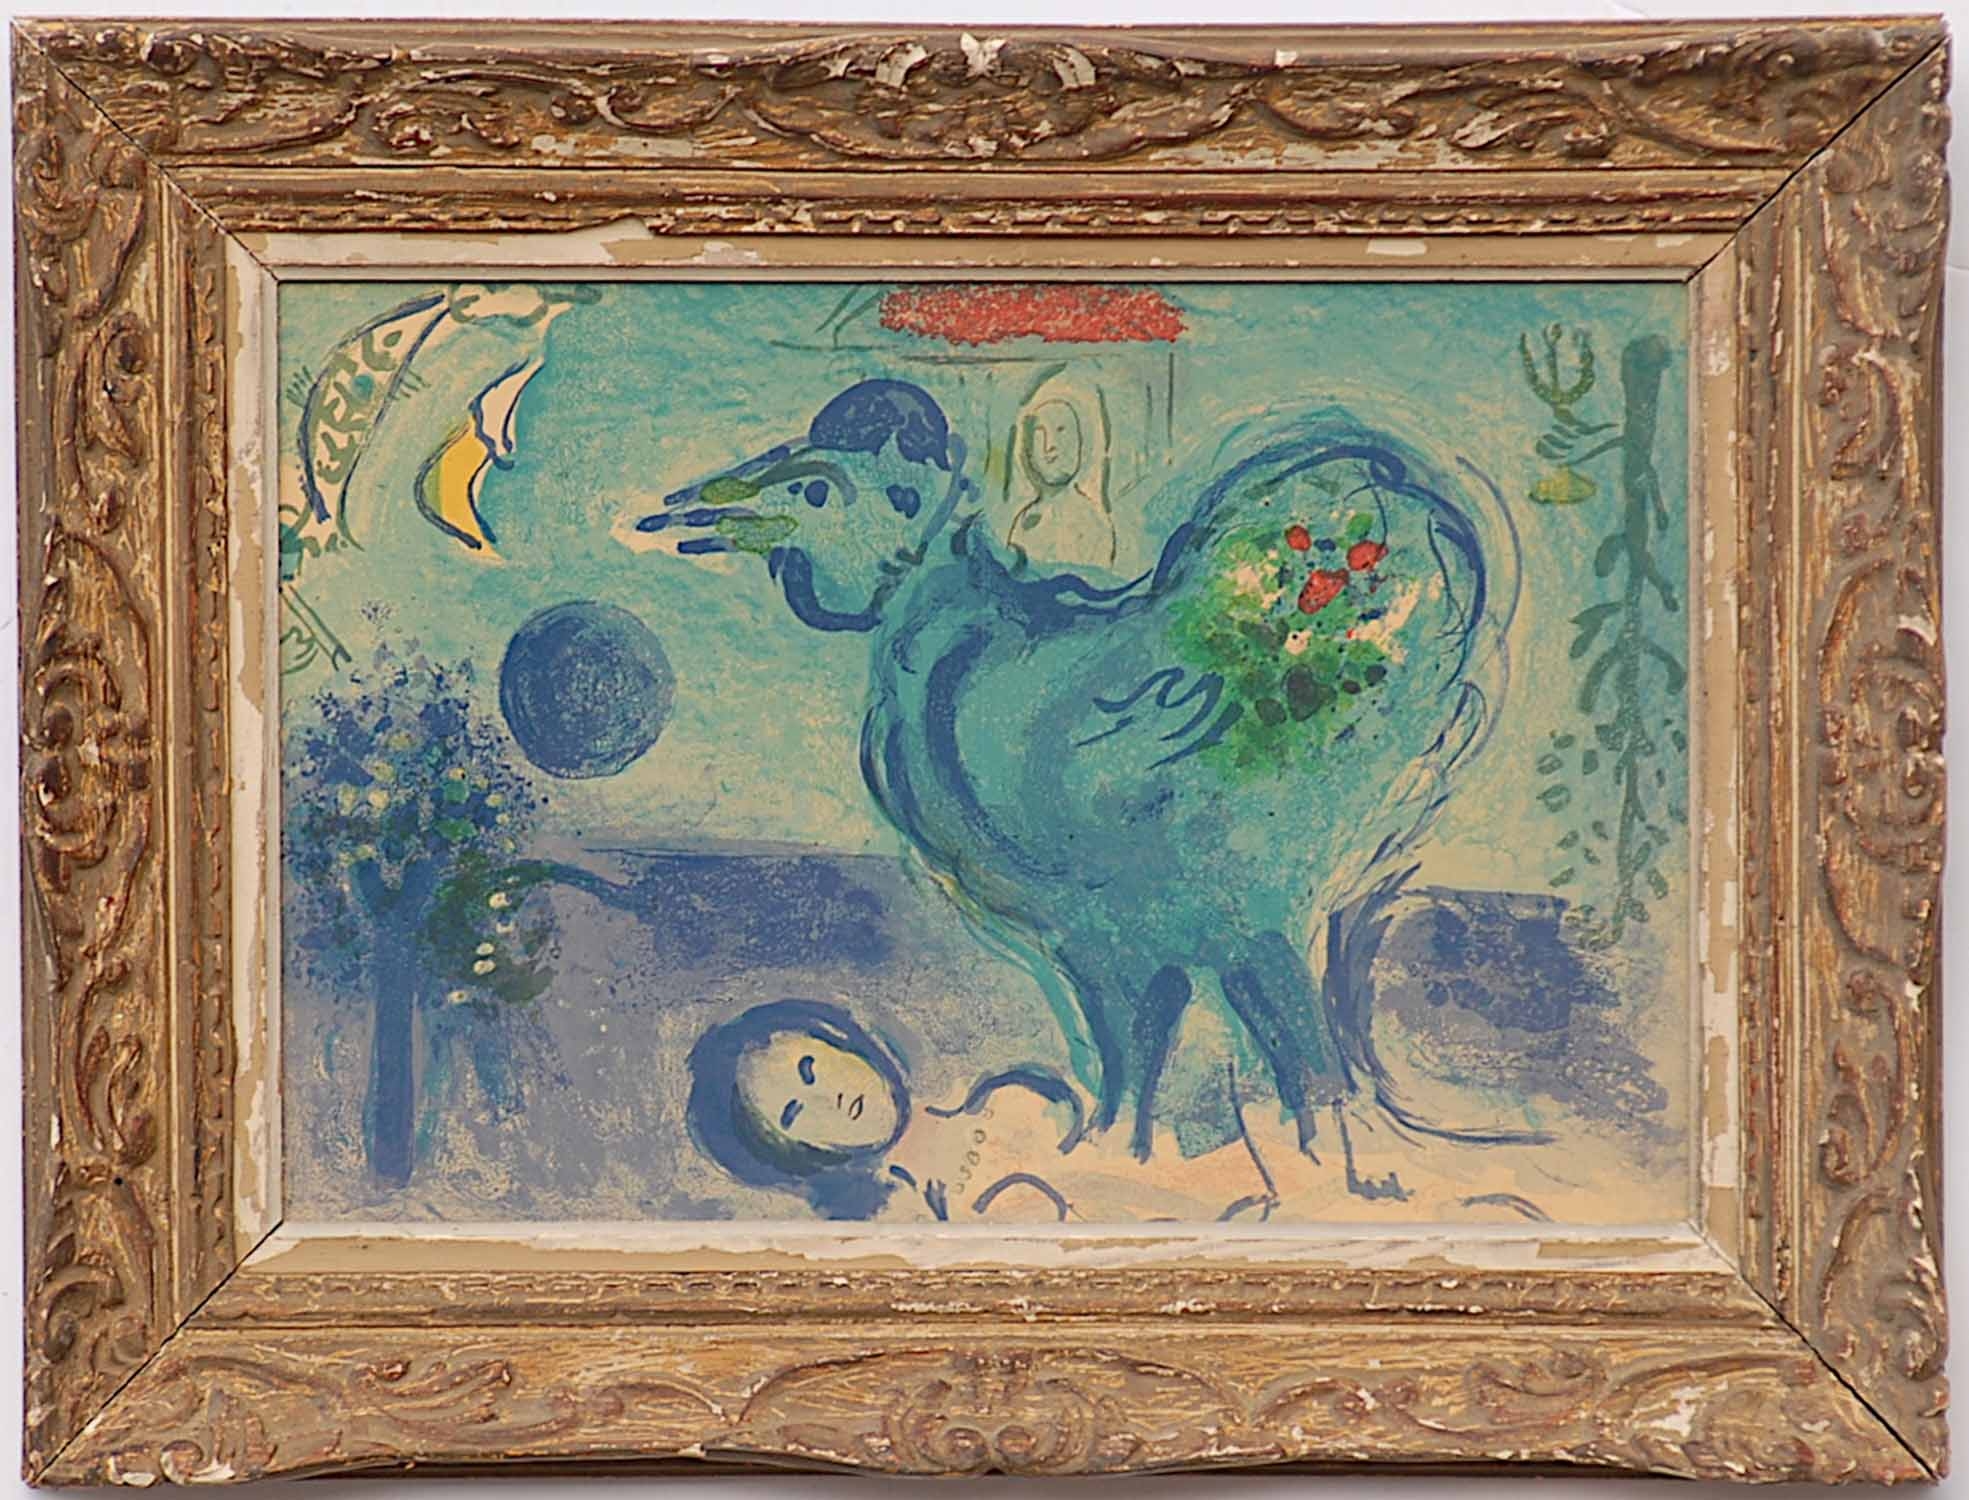 Landscape with Cockerel by Marc Chagall, 1958